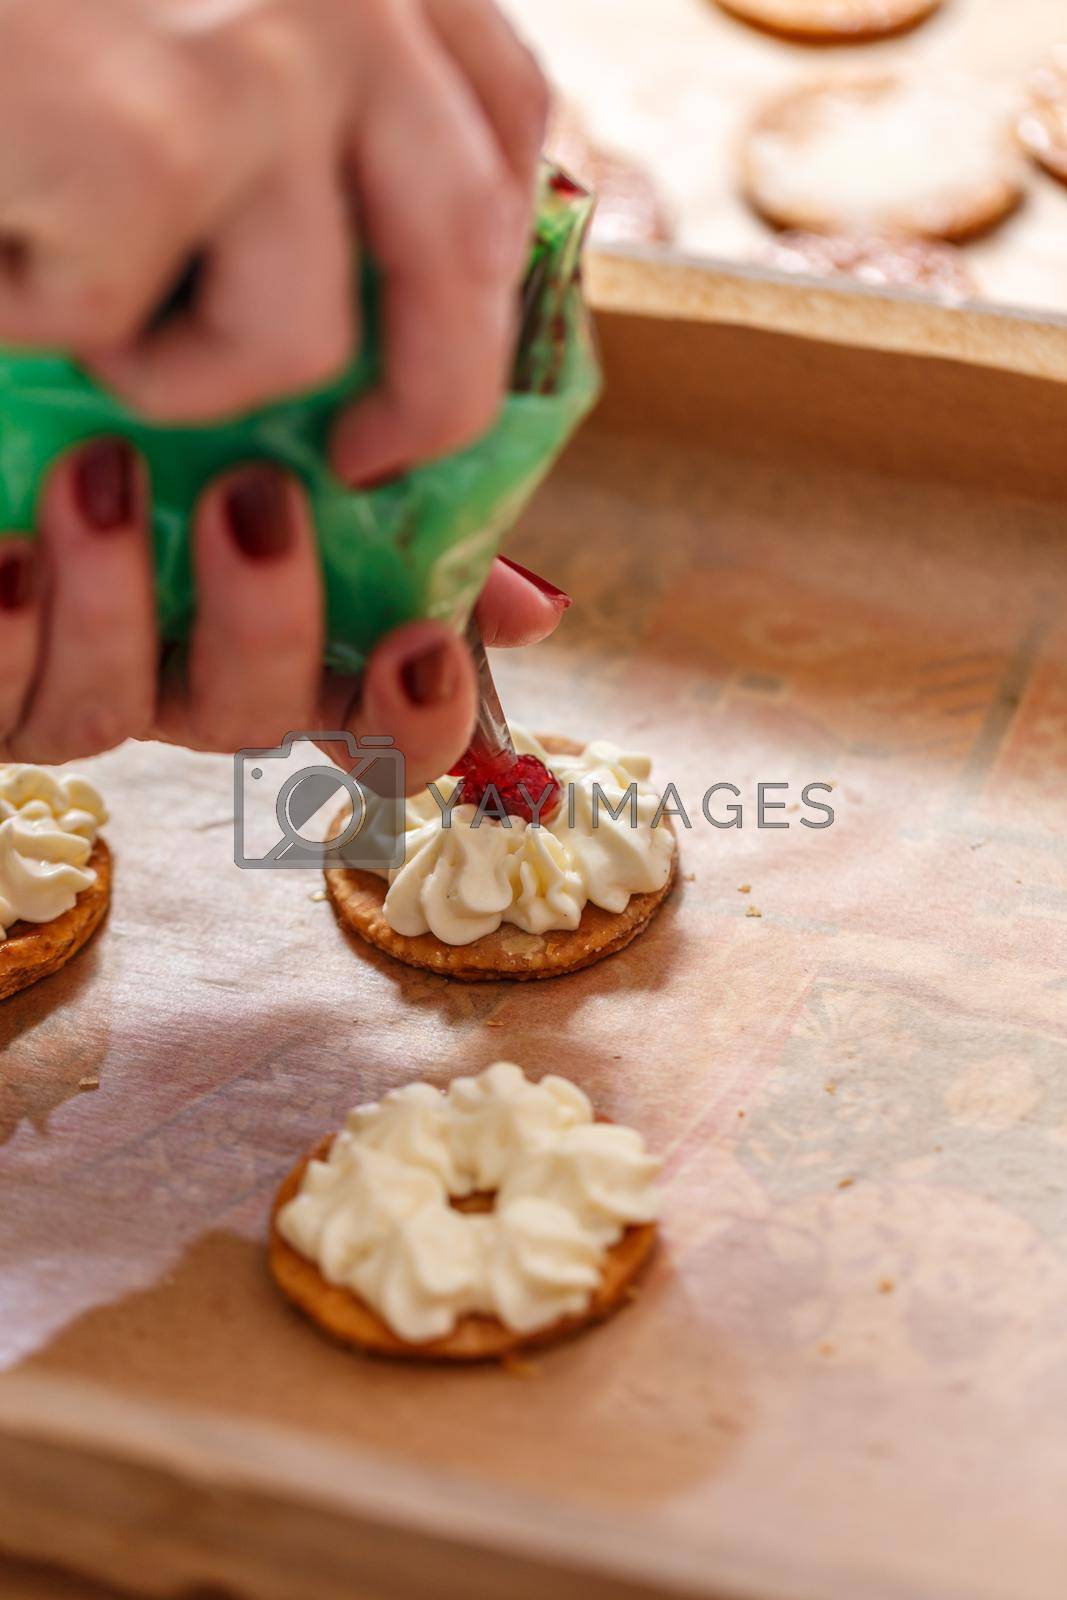 Royalty free image of The chef is decorating a cake by grafvision